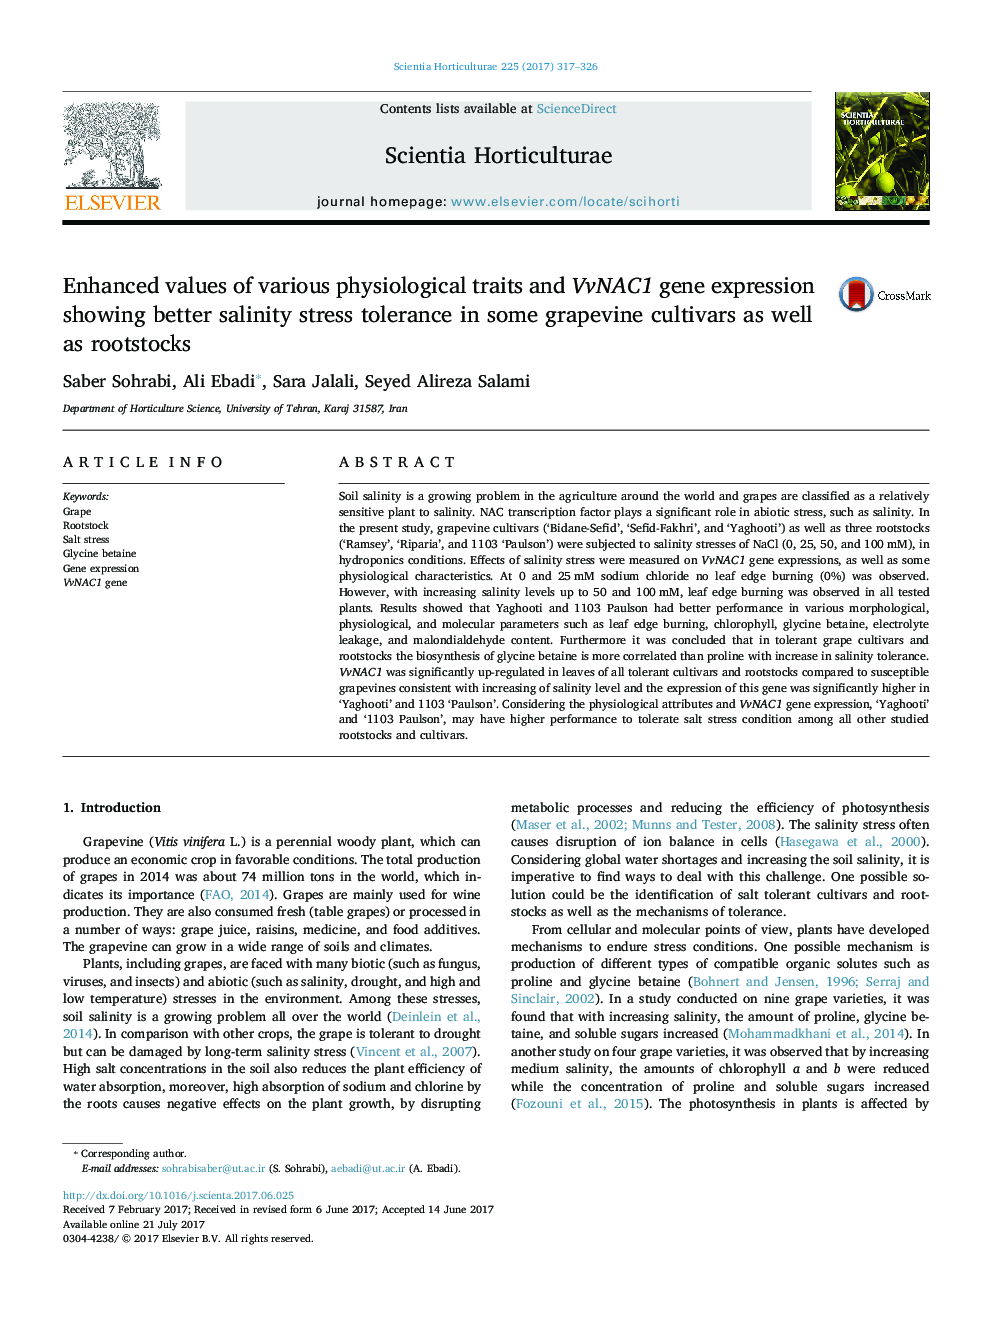 Enhanced values of various physiological traits and VvNAC1 gene expression showing better salinity stress tolerance in some grapevine cultivars as well as rootstocks